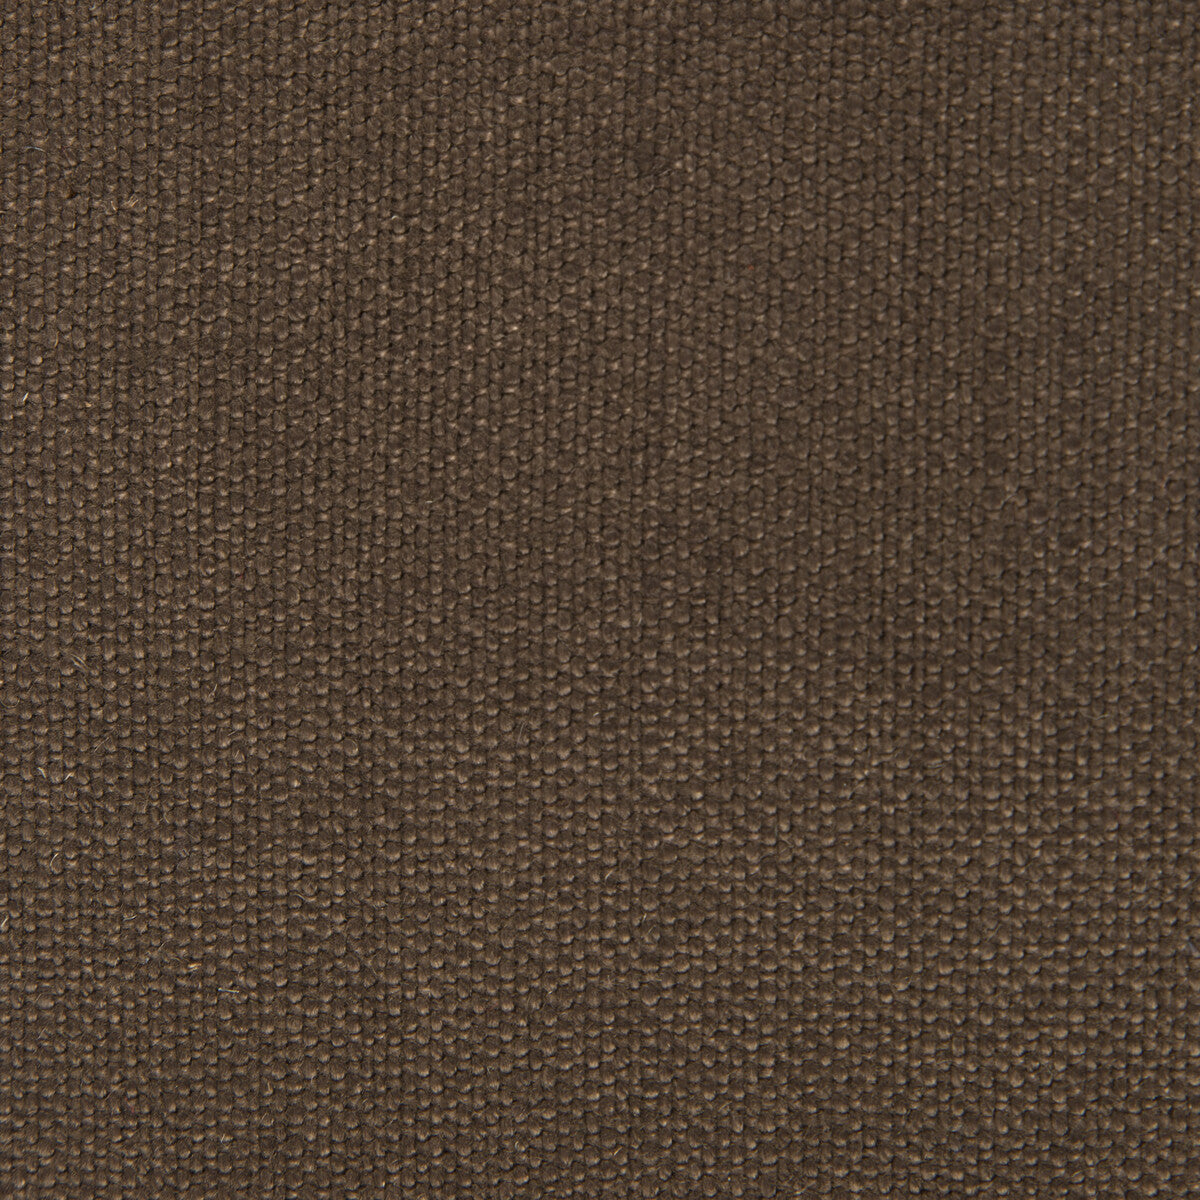 Nicaragua fabric in chocolate color - pattern GDT5239.030.0 - by Gaston y Daniela in the Basics collection